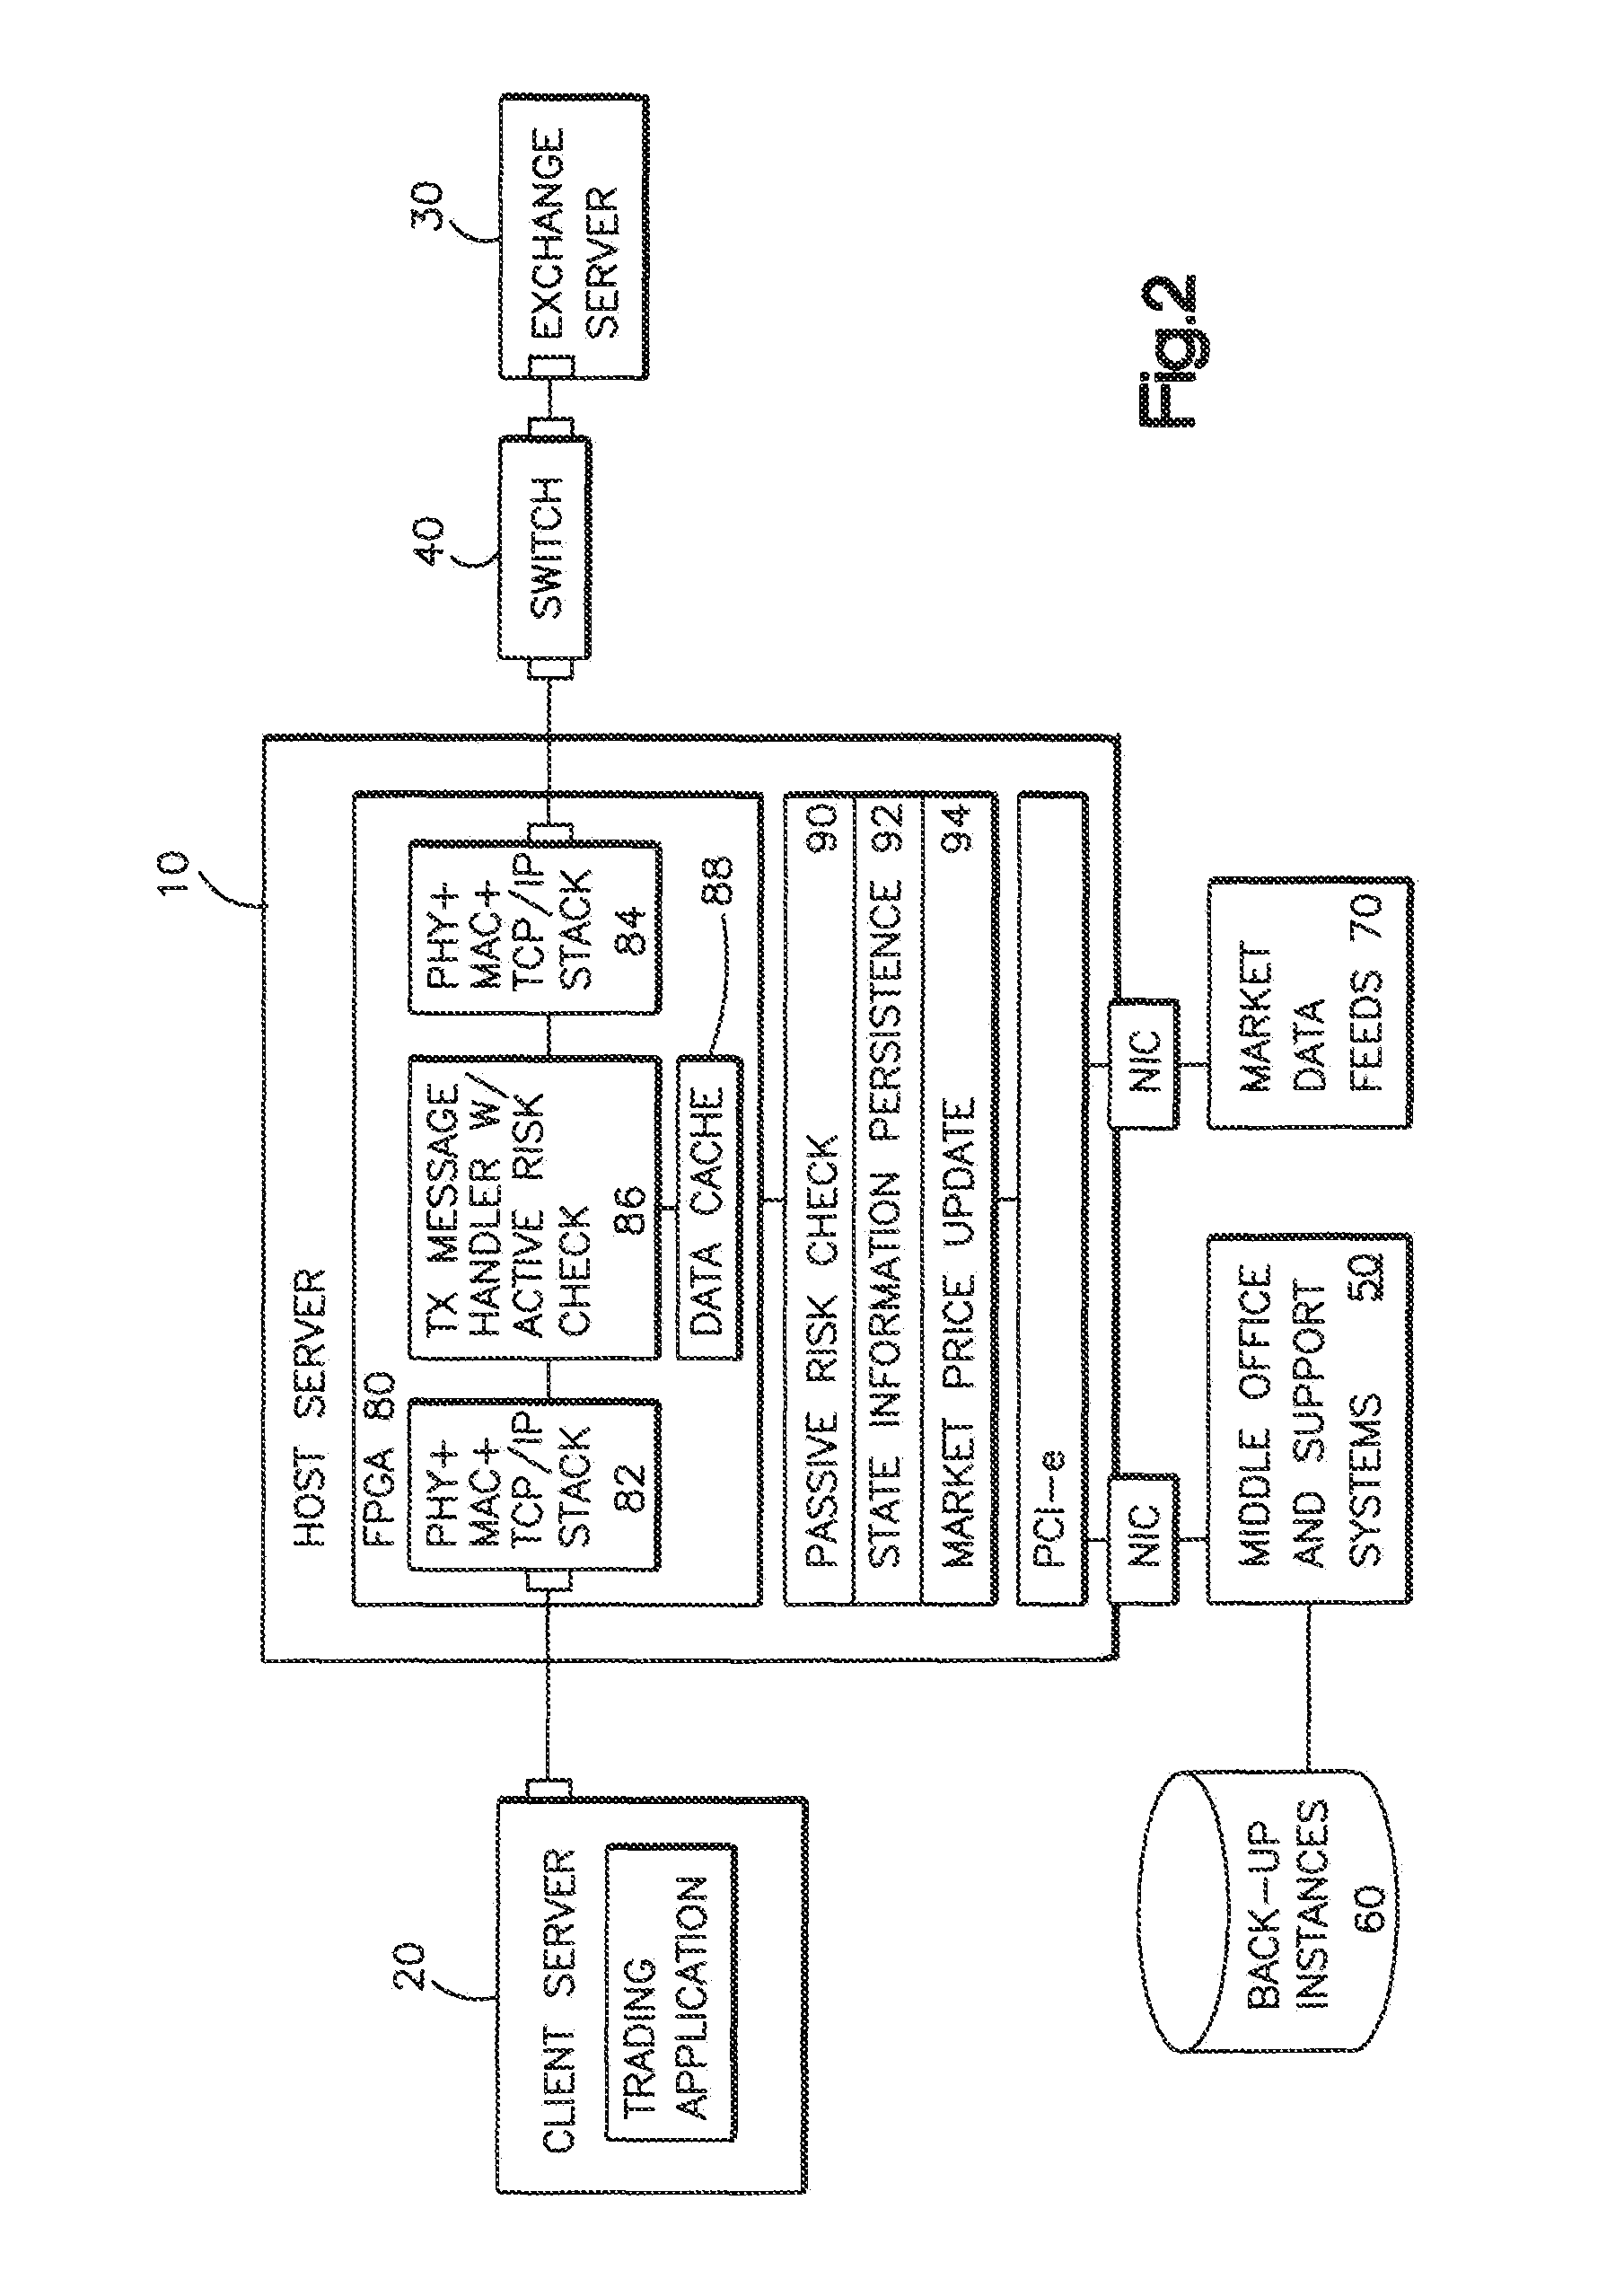 Validating an electronic order transmitted over a network between a client server and an exchange server with a hardware device